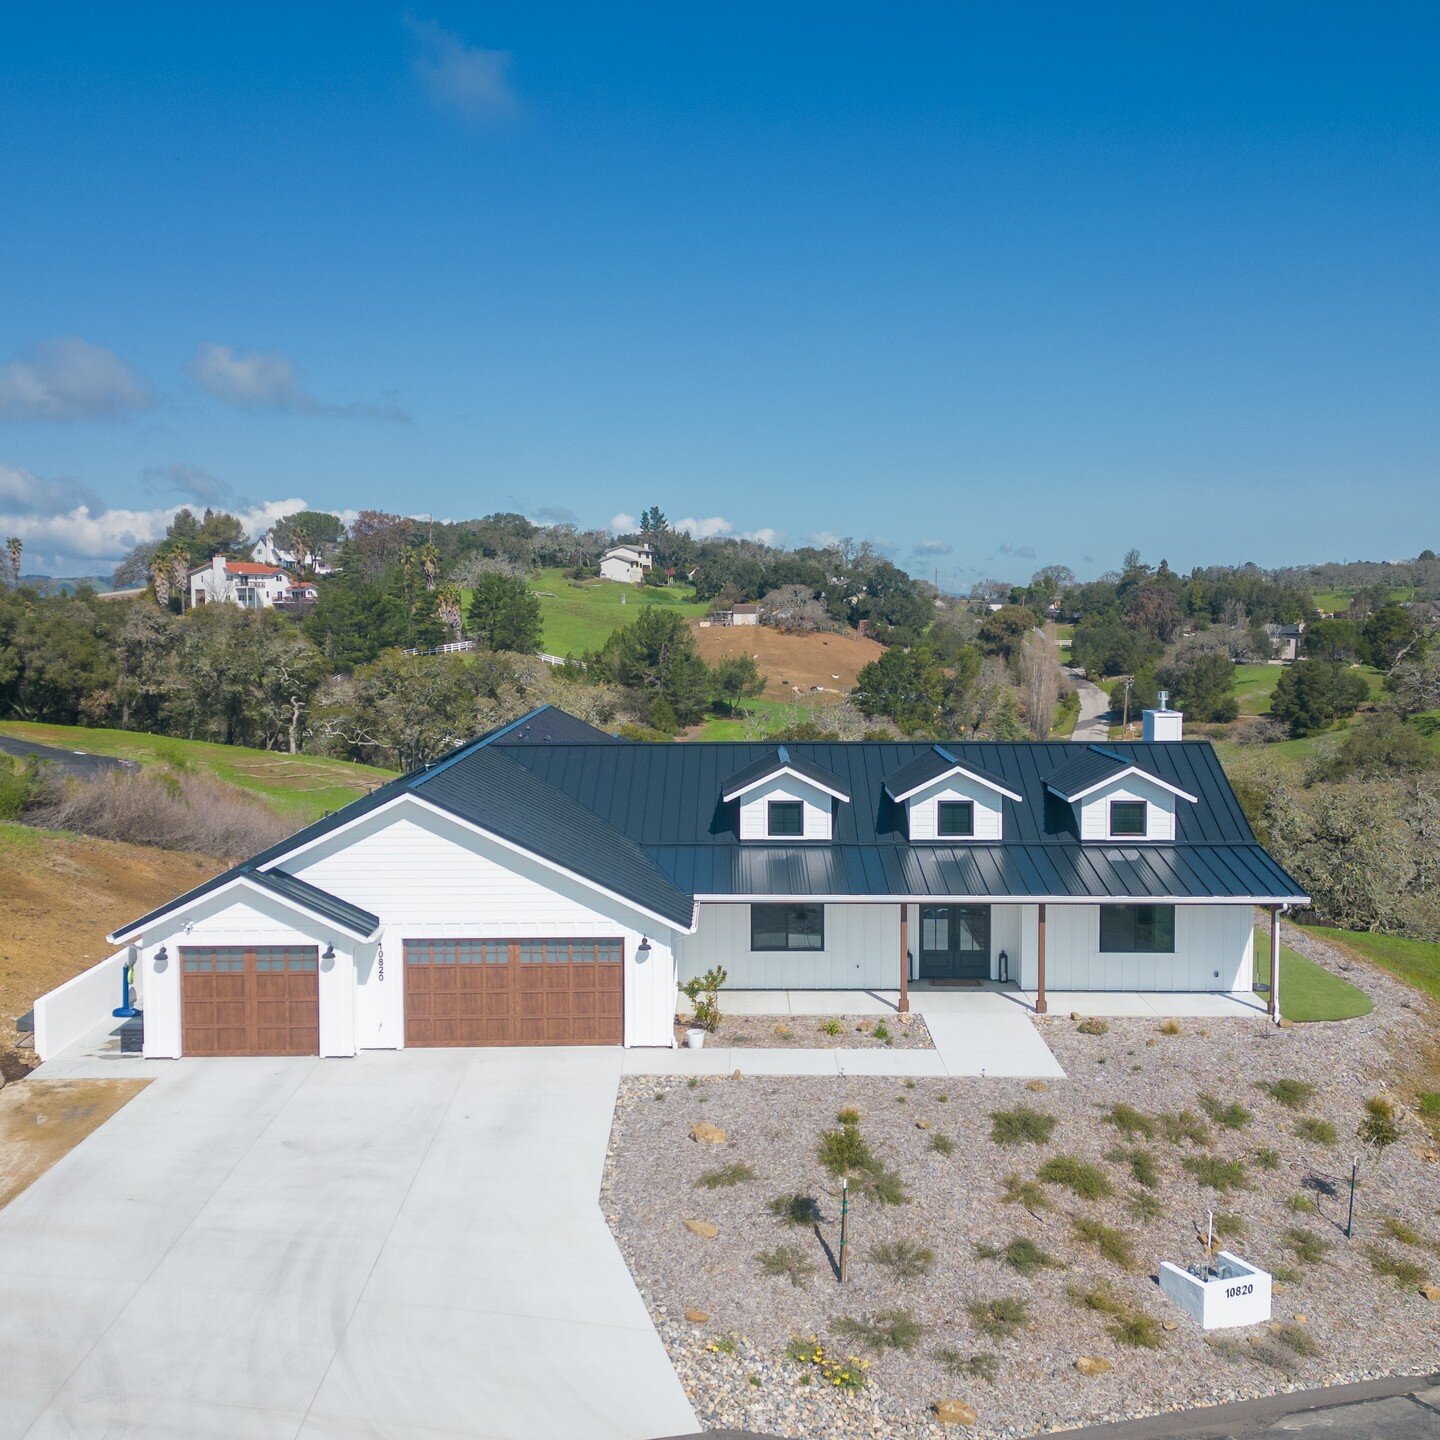 Just Listed!

10820 Vista Road, Atascadero CA 93422

Incredible views of the surrounding hills from virtually every room of this exceptional, nearly new ~3928 sq. ft., 4 bedroom 3.5 bath home. Contemporary farmhouse design features an open concept fl